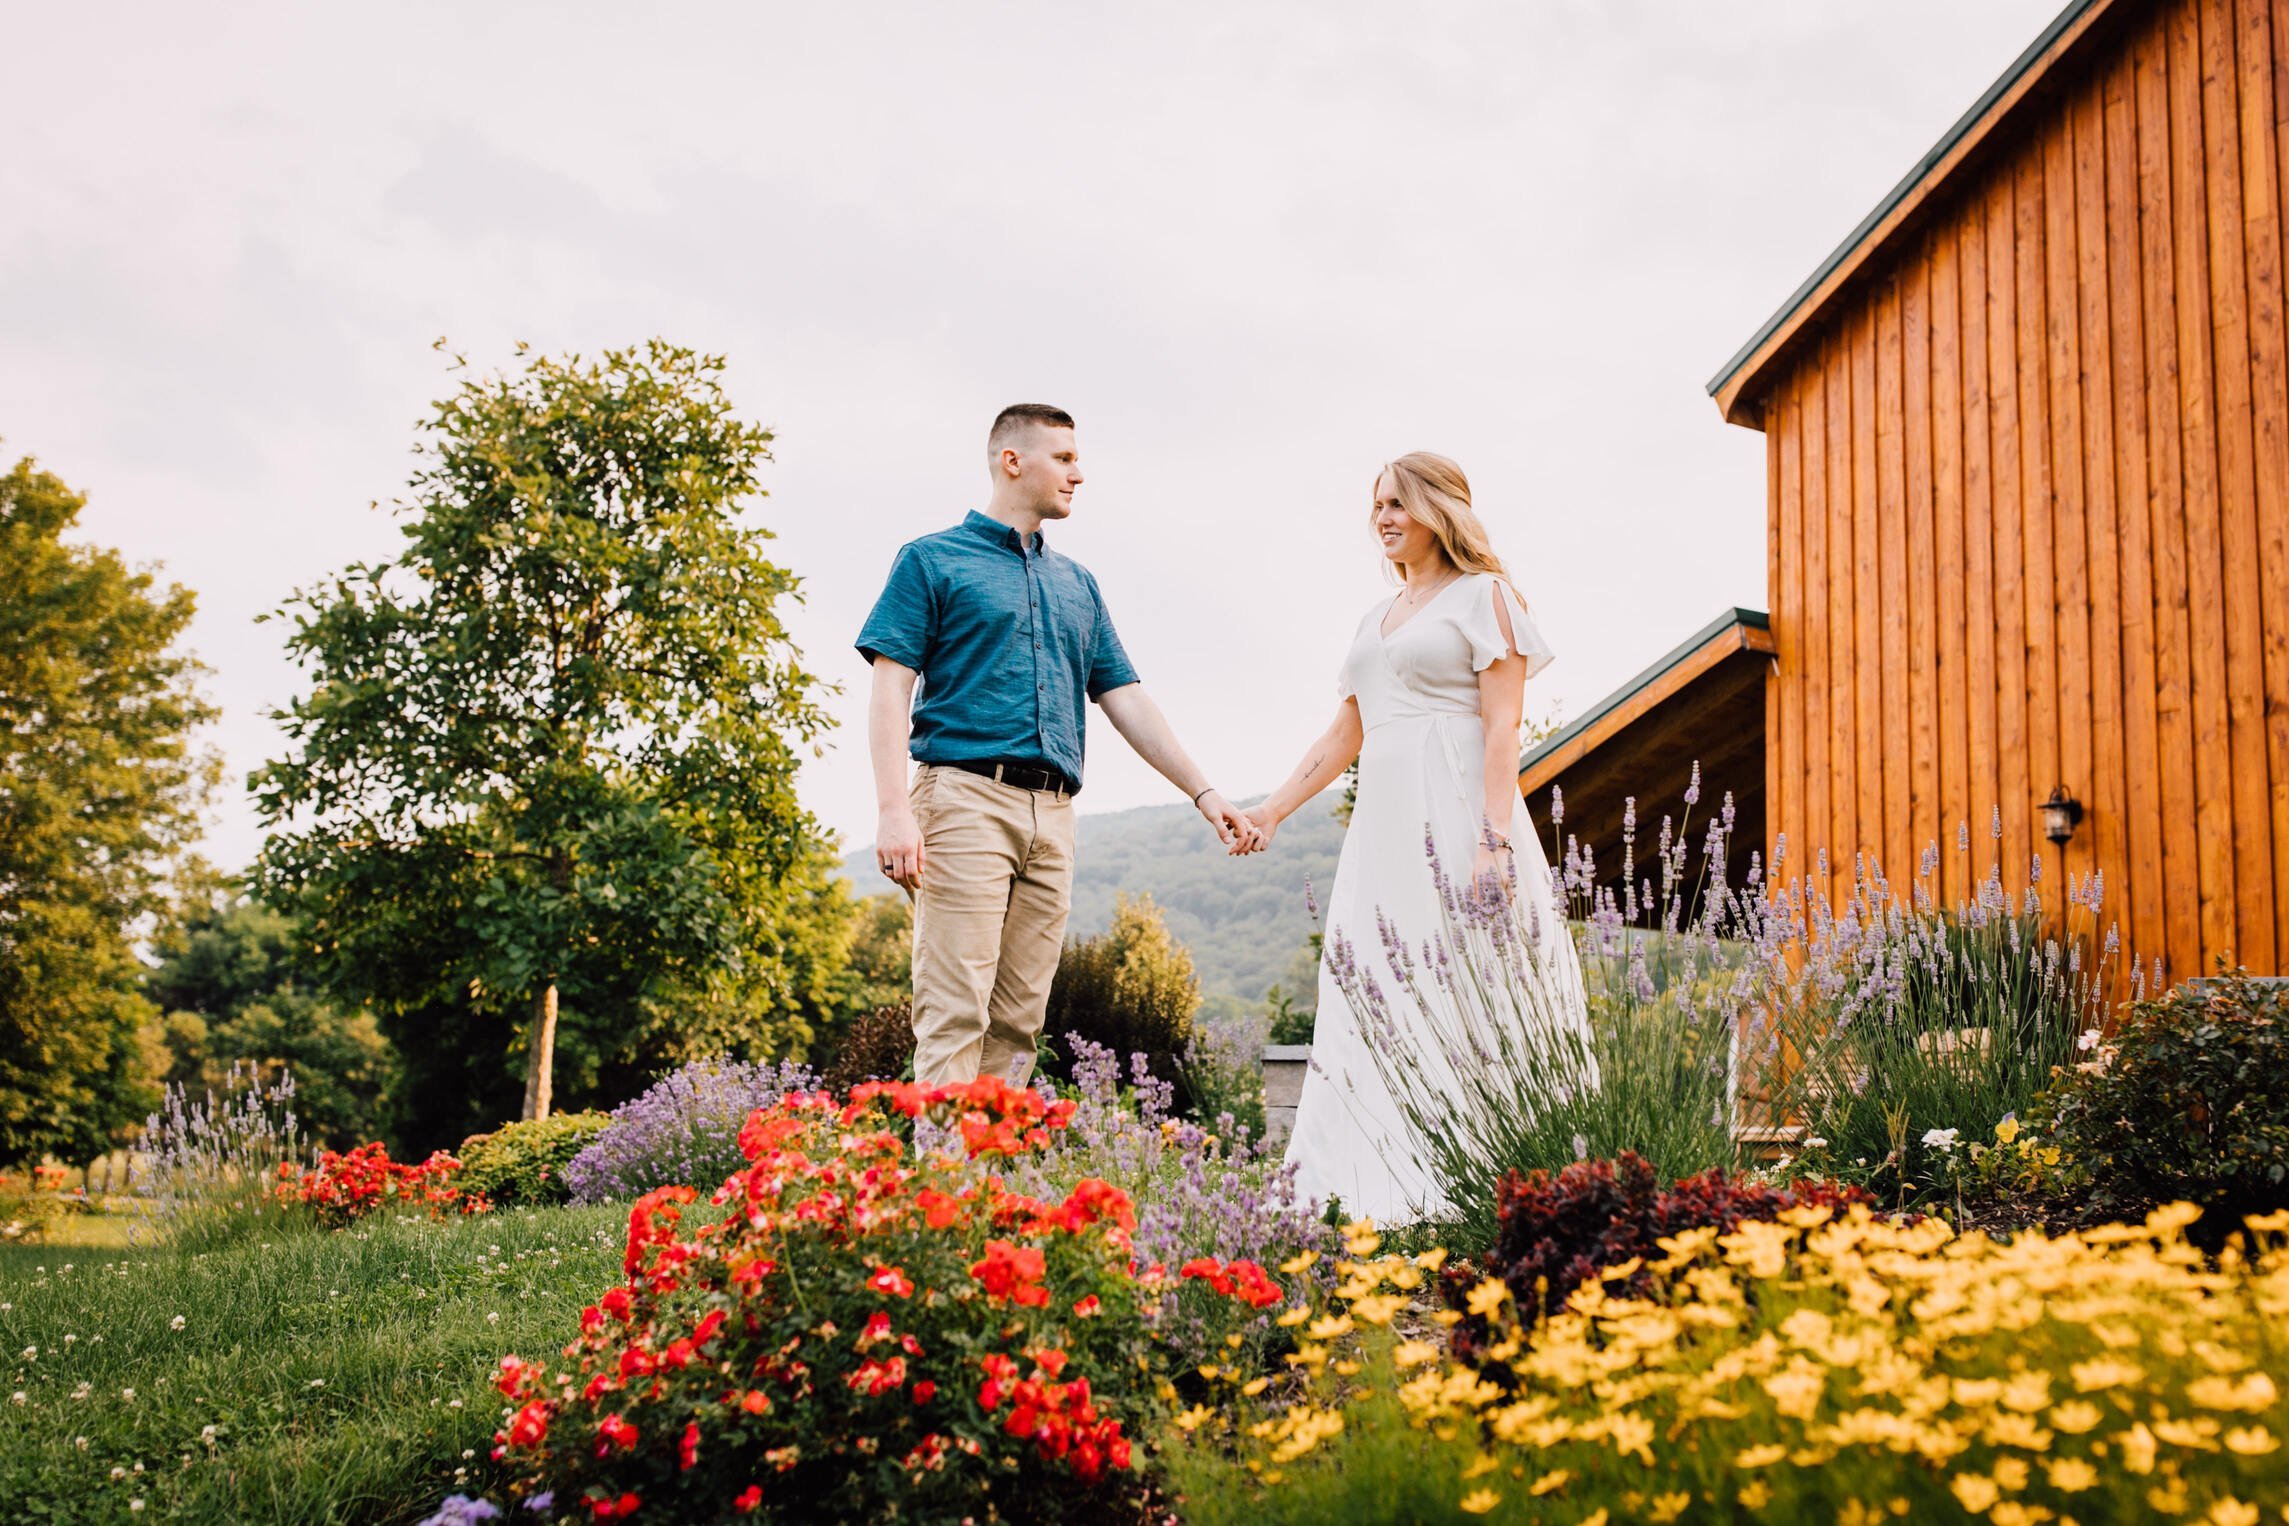  engaged couple stand together while holding hands in front of blooming flowers at rocking horse farm   